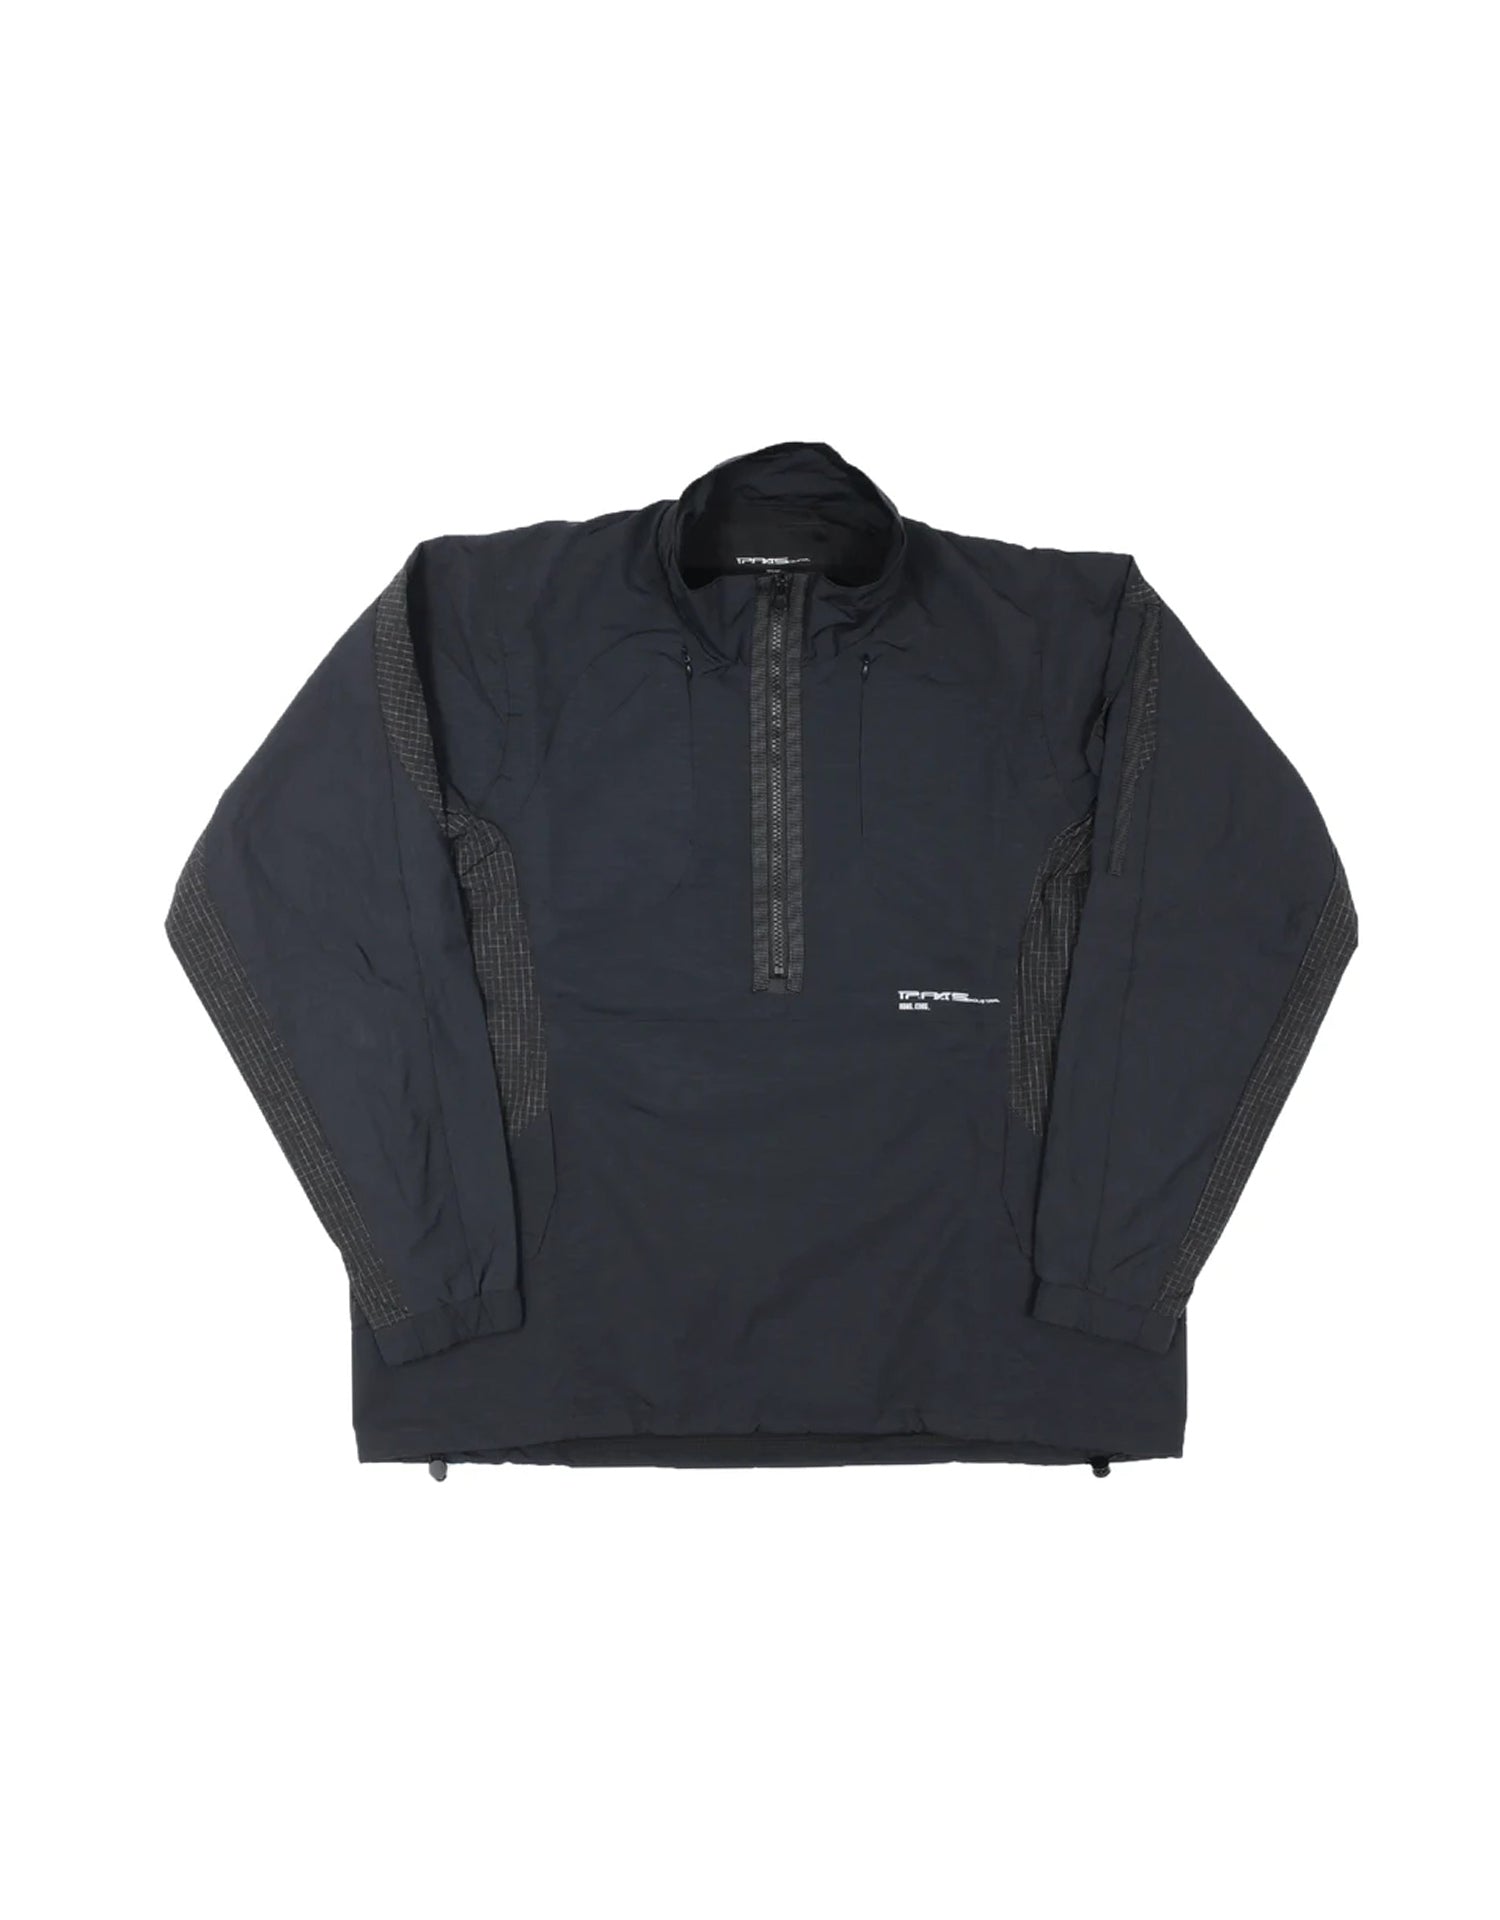 Ip-Axis Industrial Functional Sweater